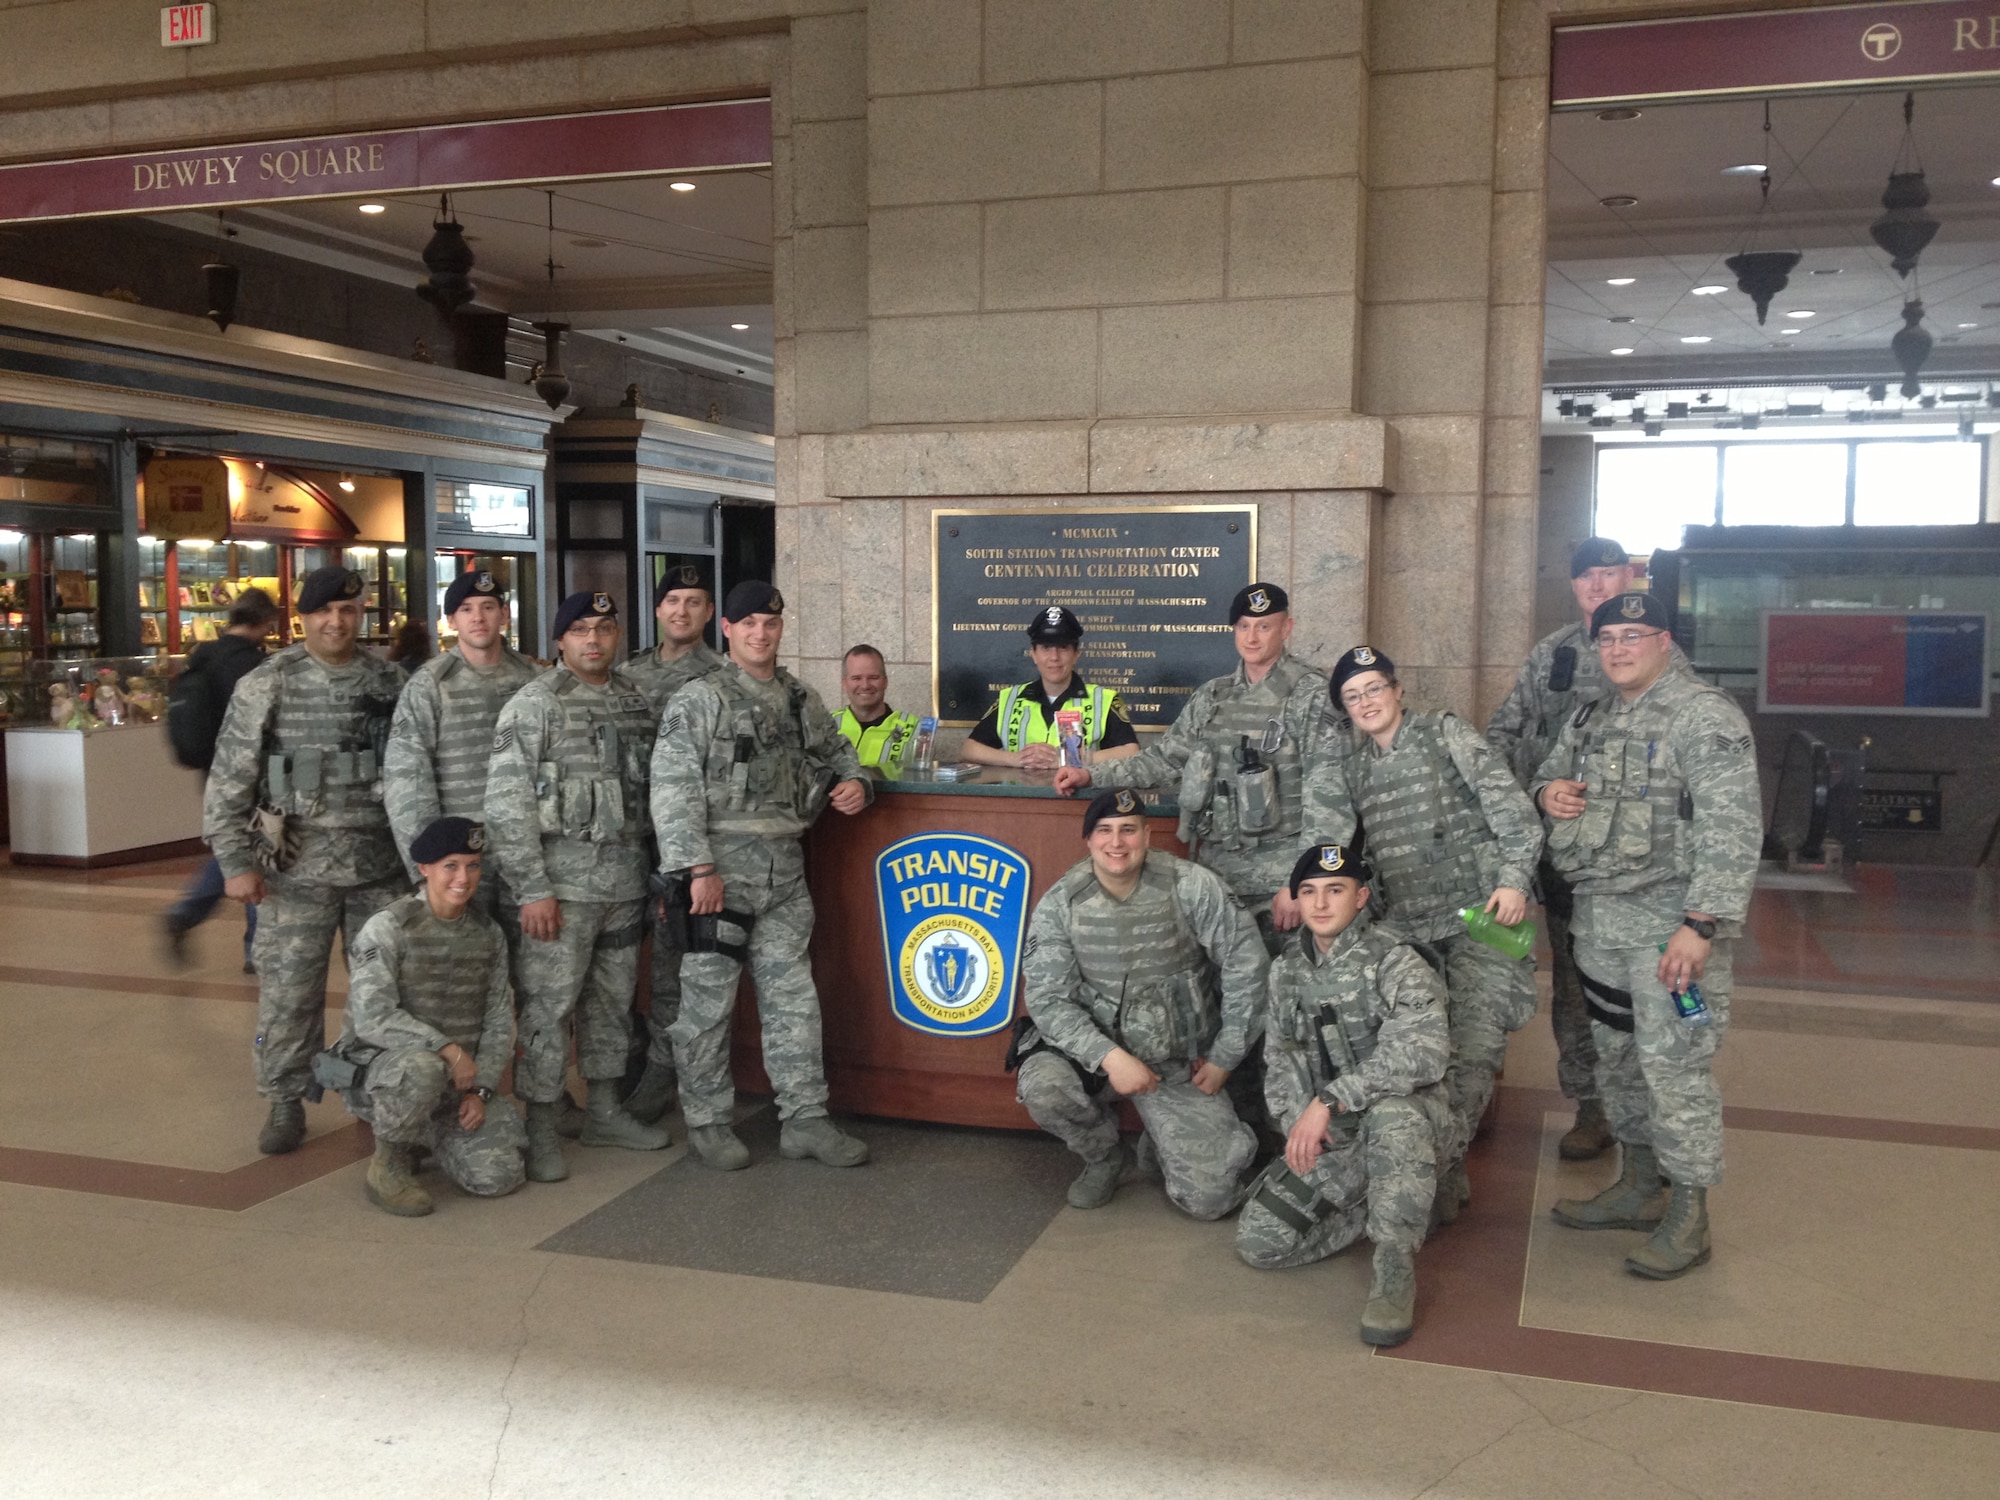 Members of the 104th Fighter Wing, Mass. Air National Guard Security Forces, assist the Boston Transit Police directly after the Boston Marathon Bombing April 15, 2013.